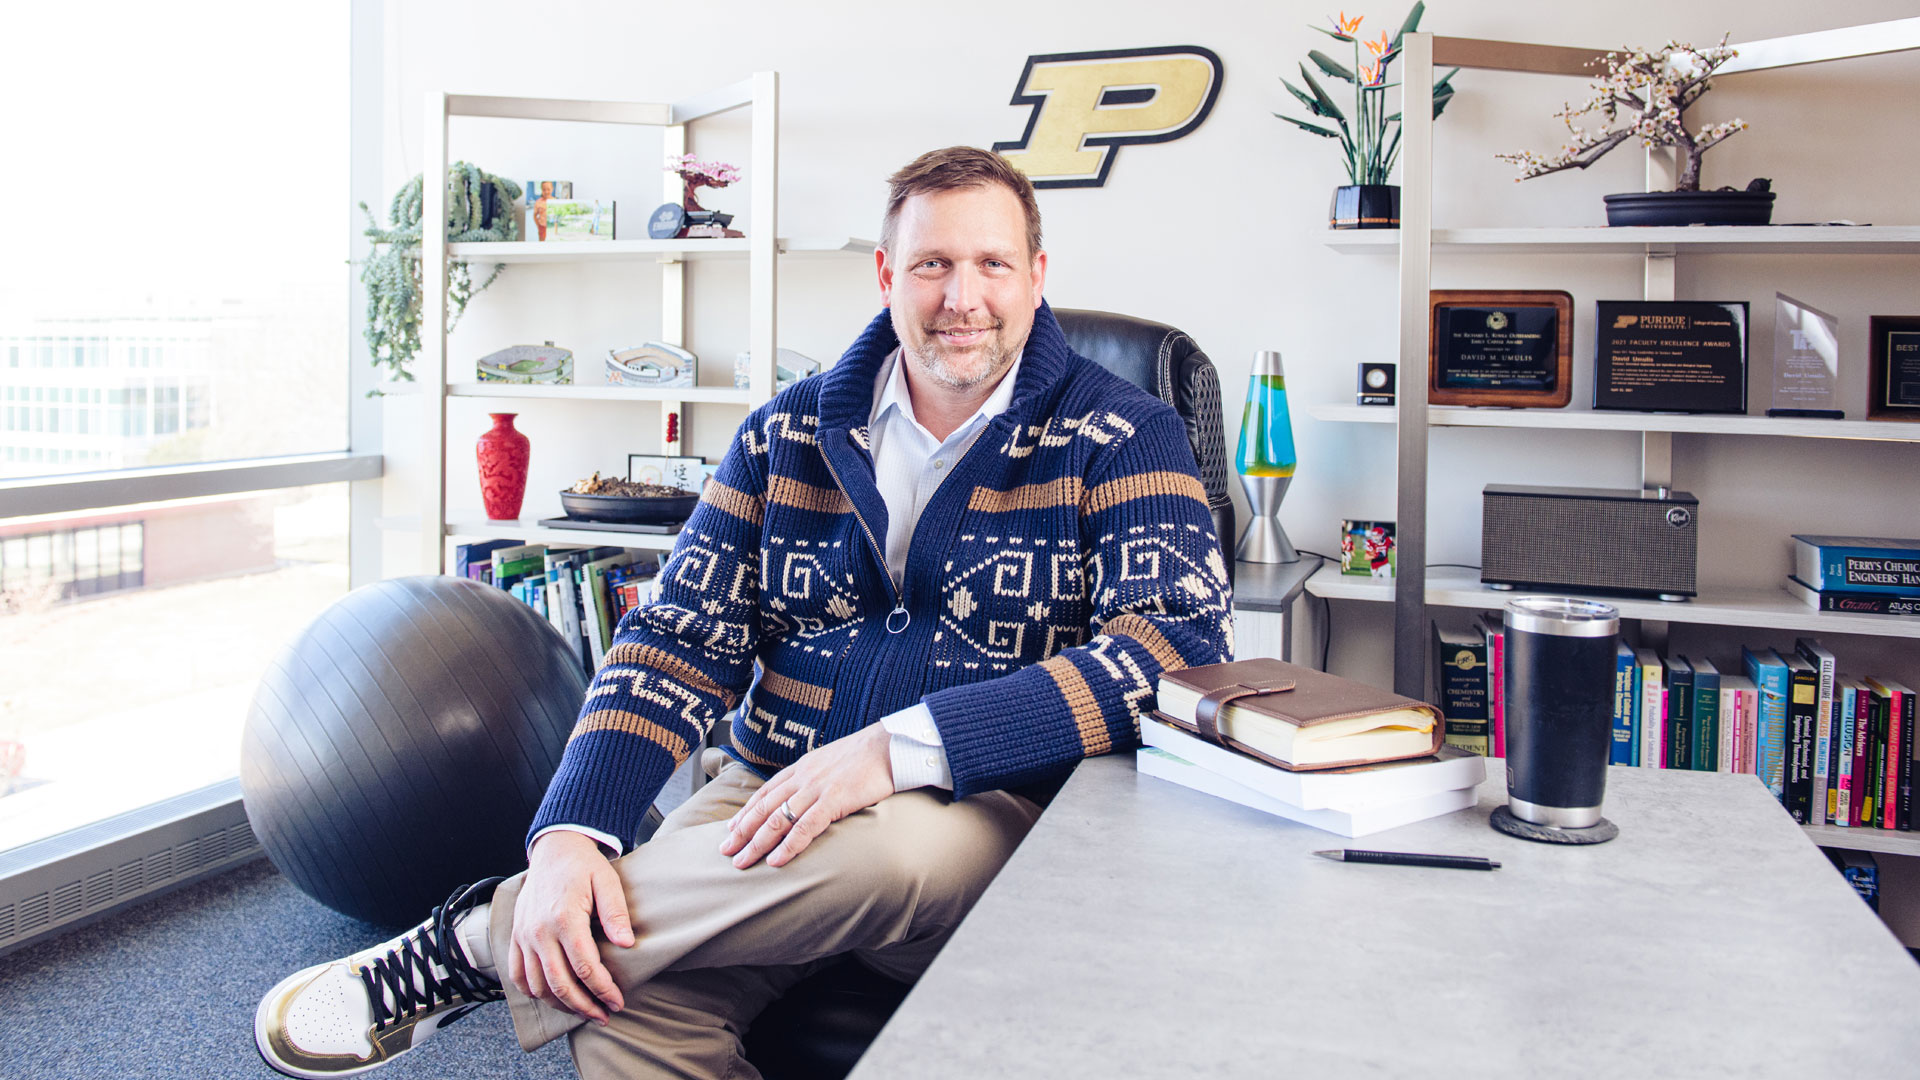 David Umulis took over as Dane A. Miller Head of Purdue University’s Weldon School of Biomedical Engineering on July 1, 2021. (Photo by Rebecca McElhoe/Purdue Marketing and Communications)